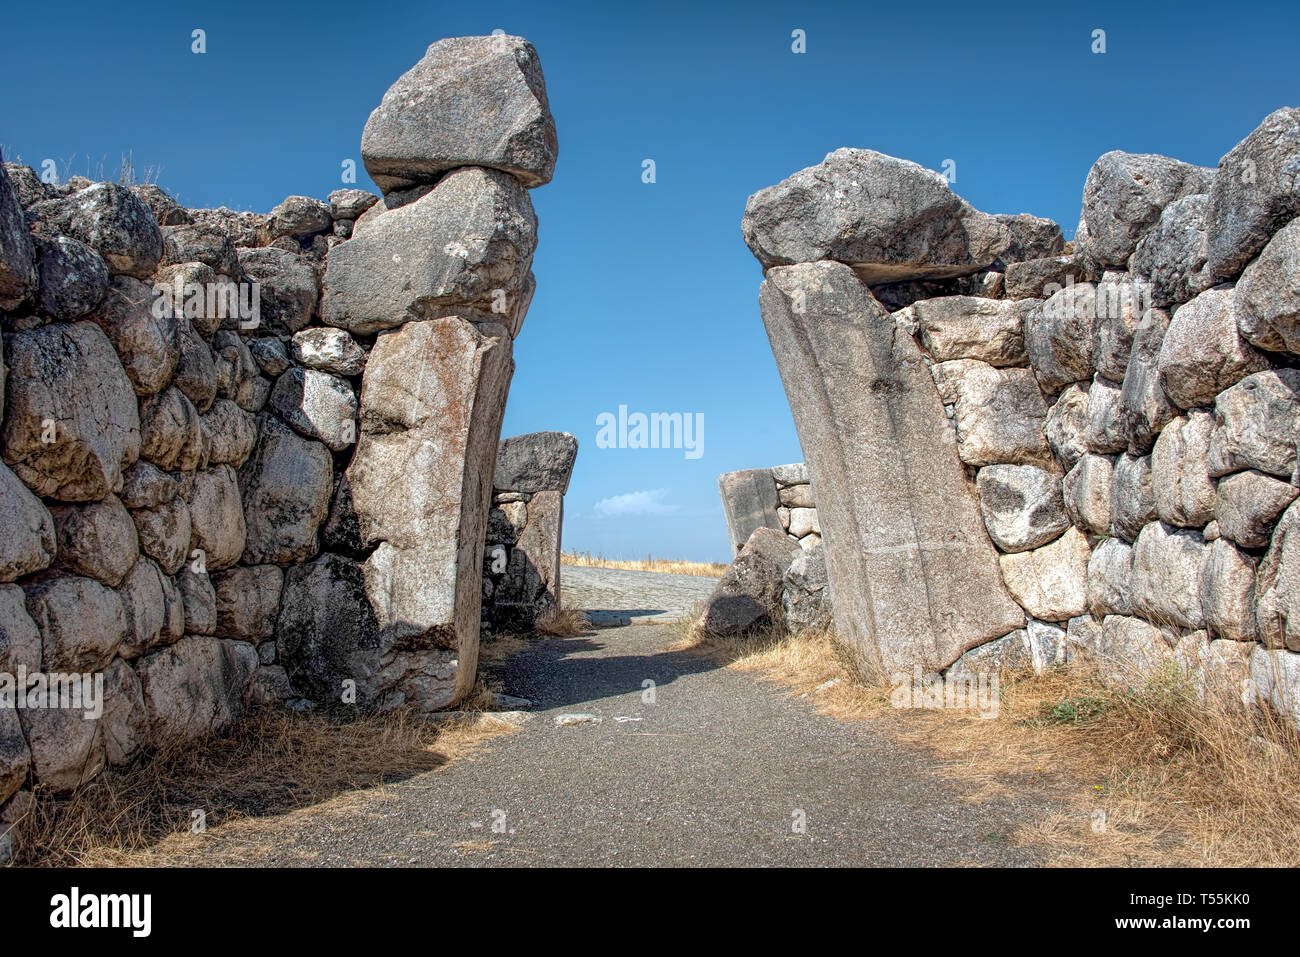 Lions Gate at Hattusa, the capital of the Hittite Empire in the late Bronze Age. Its ruins lie near modern Boğazkale, Turkey, within the great loop of Stock Photo